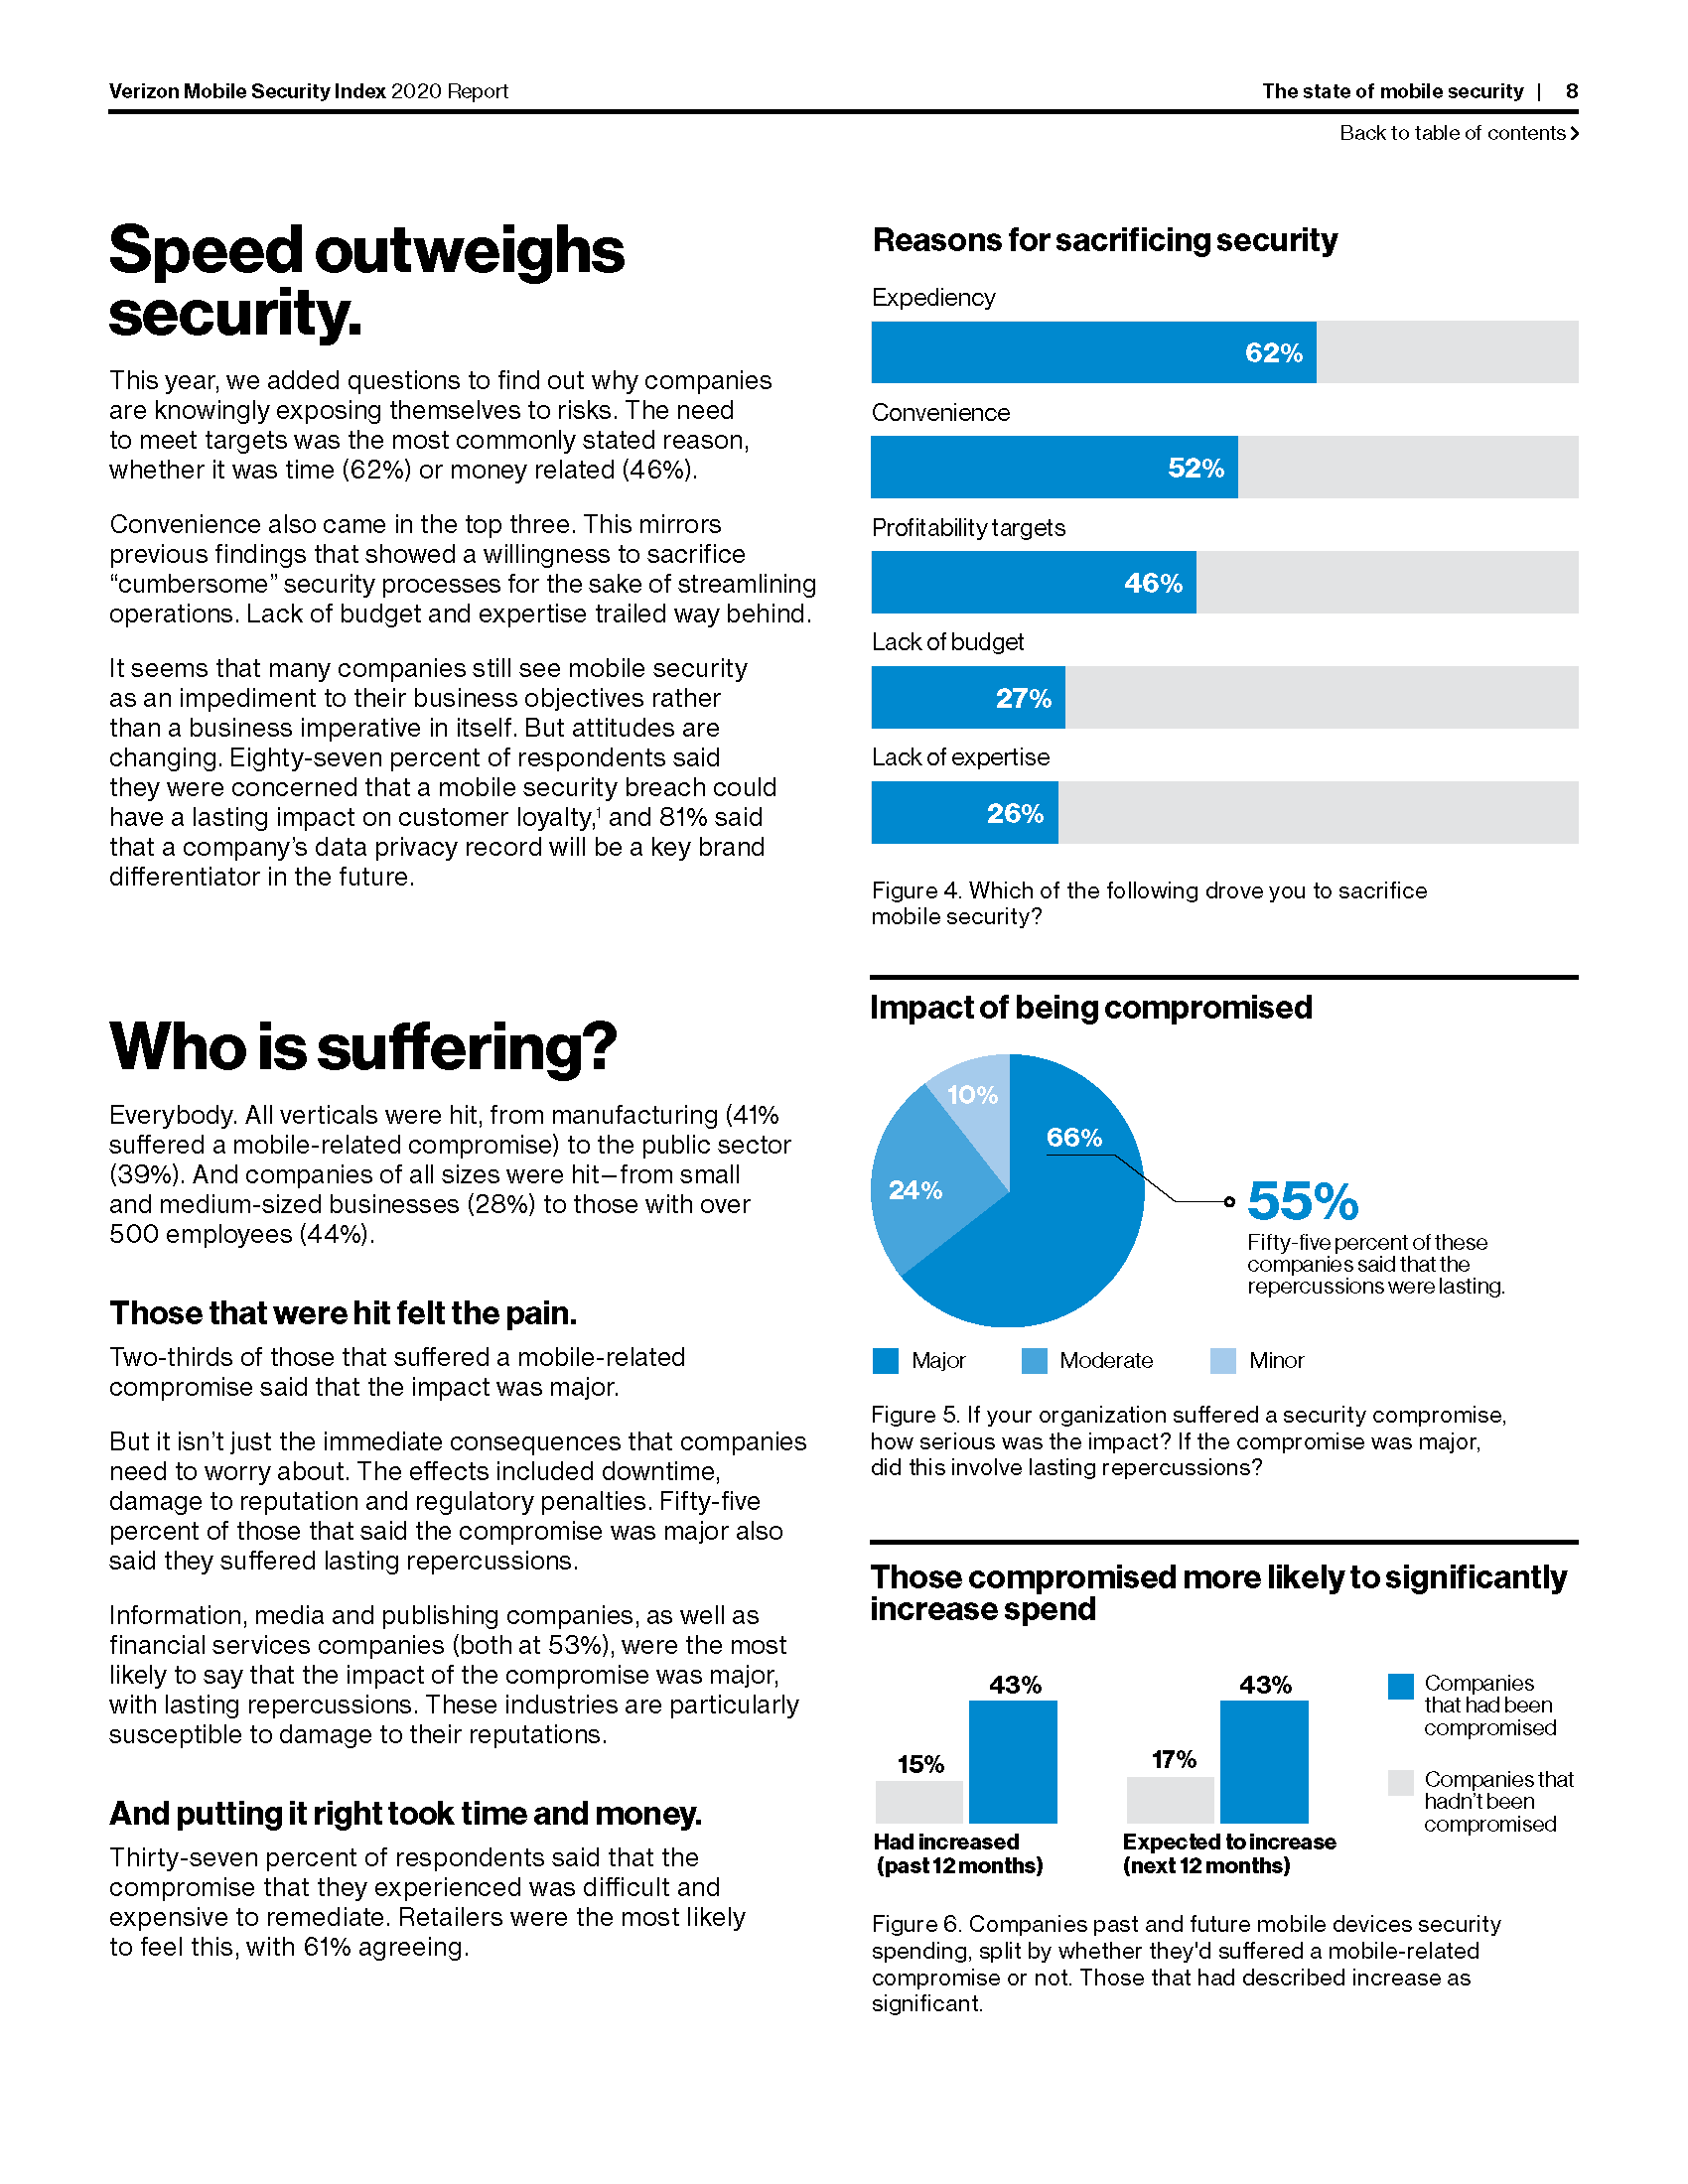 Excerpt from the Mobile Security Index 2020